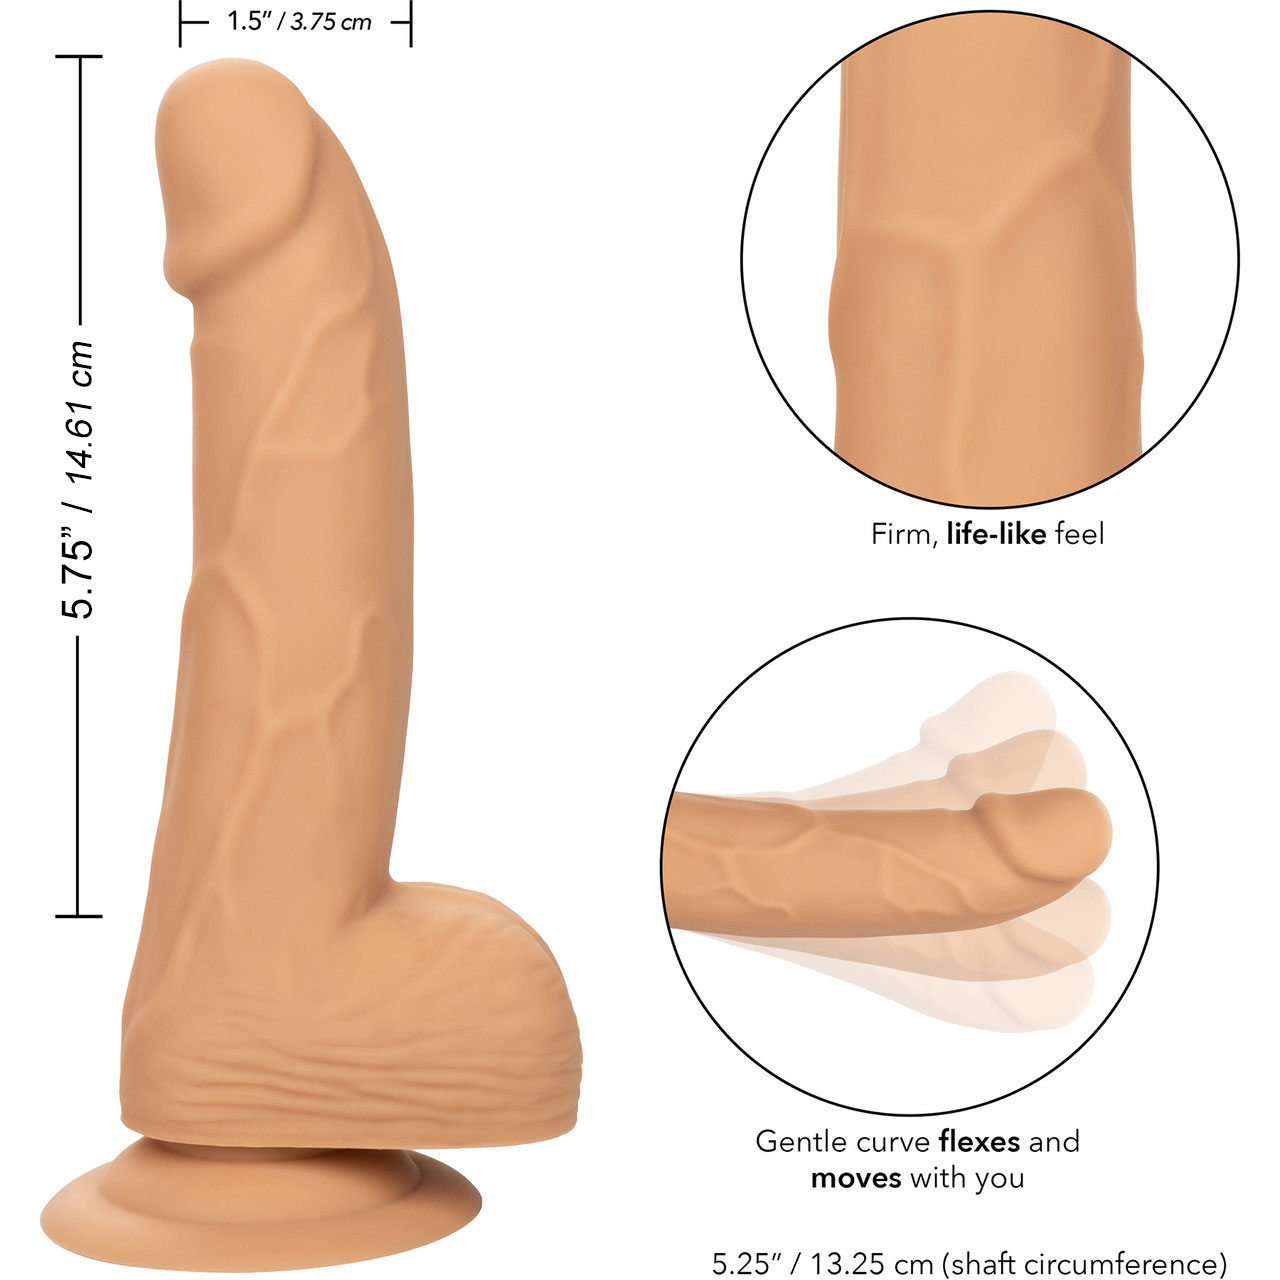 Silicone Studs Realistic 6" Suction Cup Dildo - Measurements